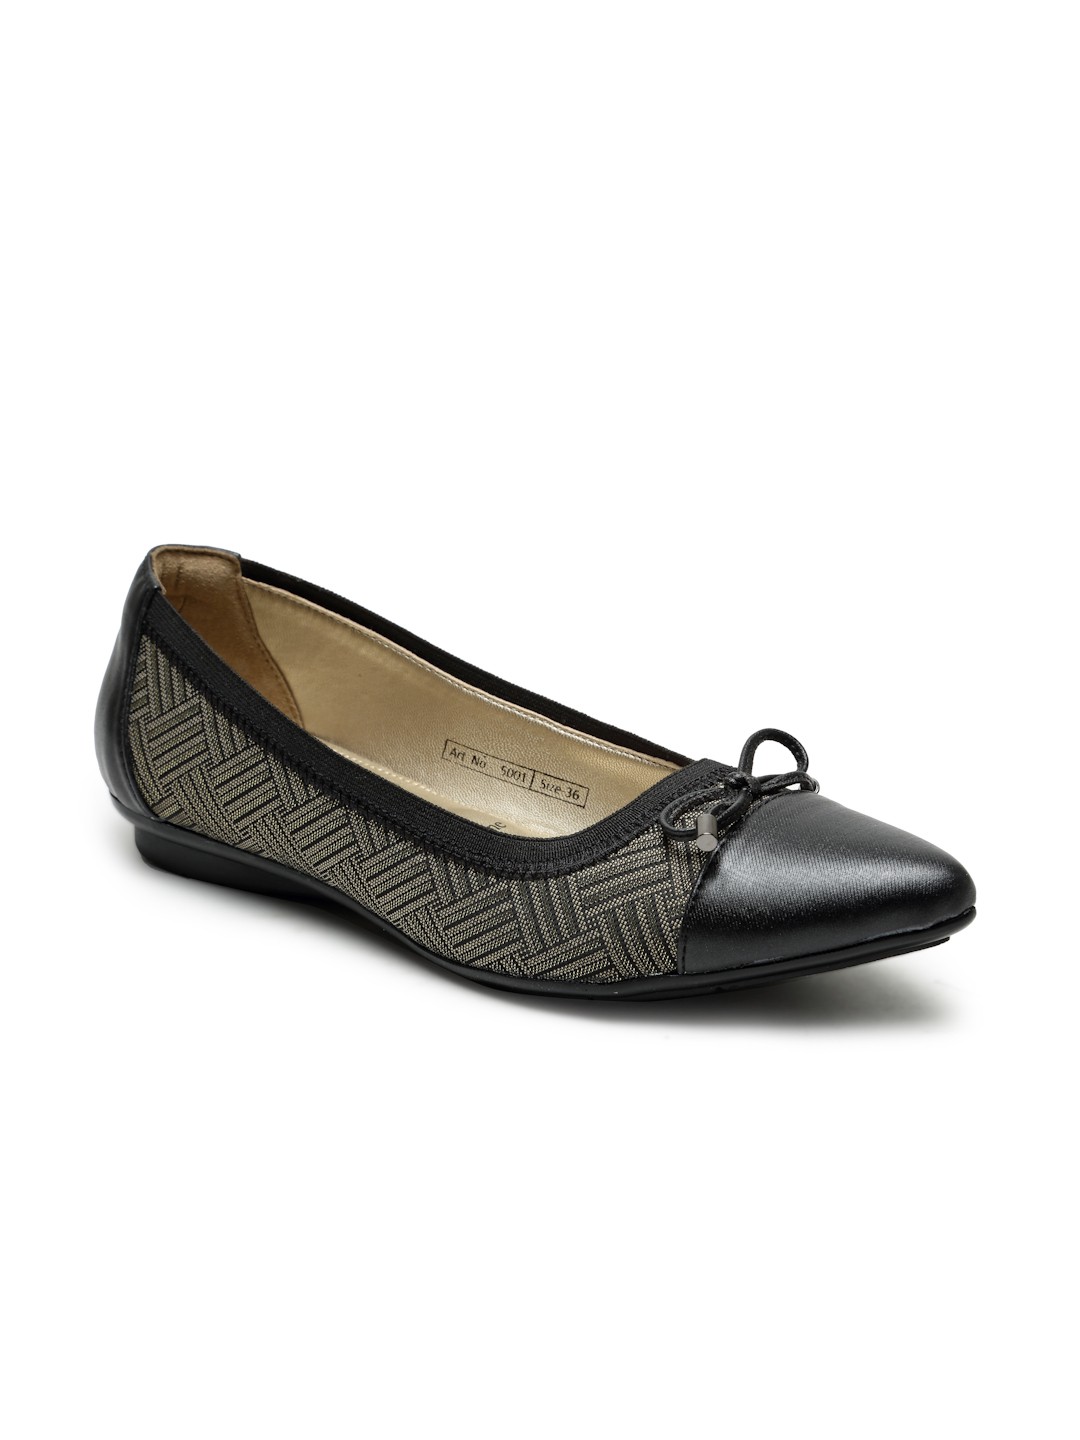 Buy Von Wellx Germany Comfort Women's Black Casual Shoes Lisa Online in Bangalore